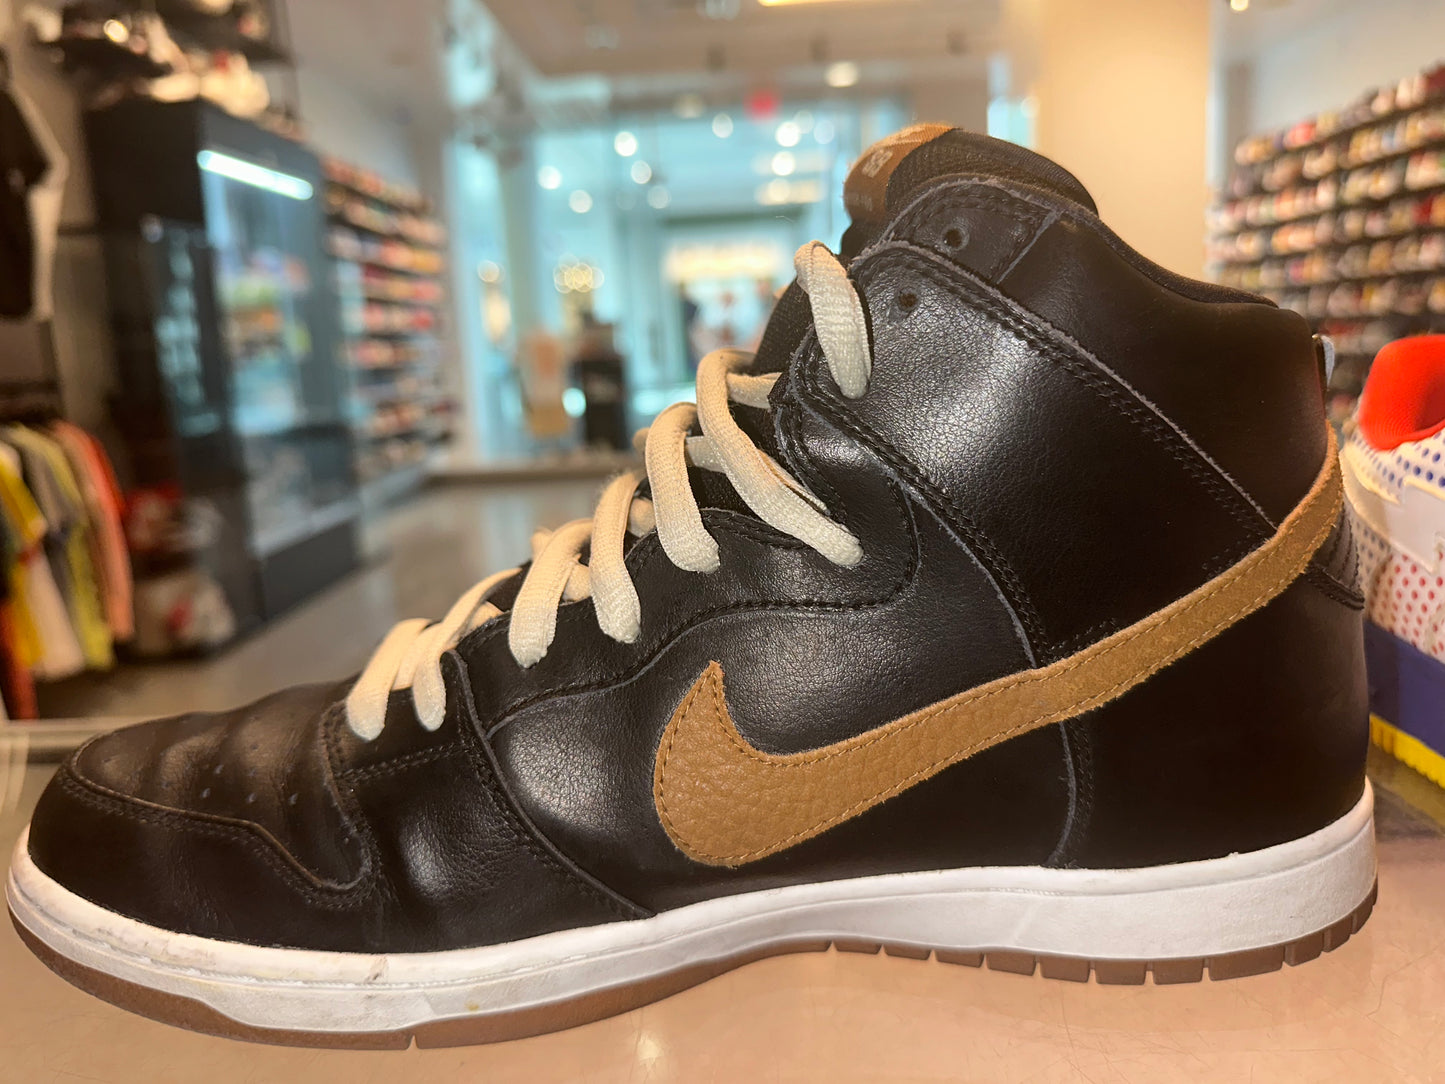 Size 11.5 SB Dunk High “Guiness” (Mall)